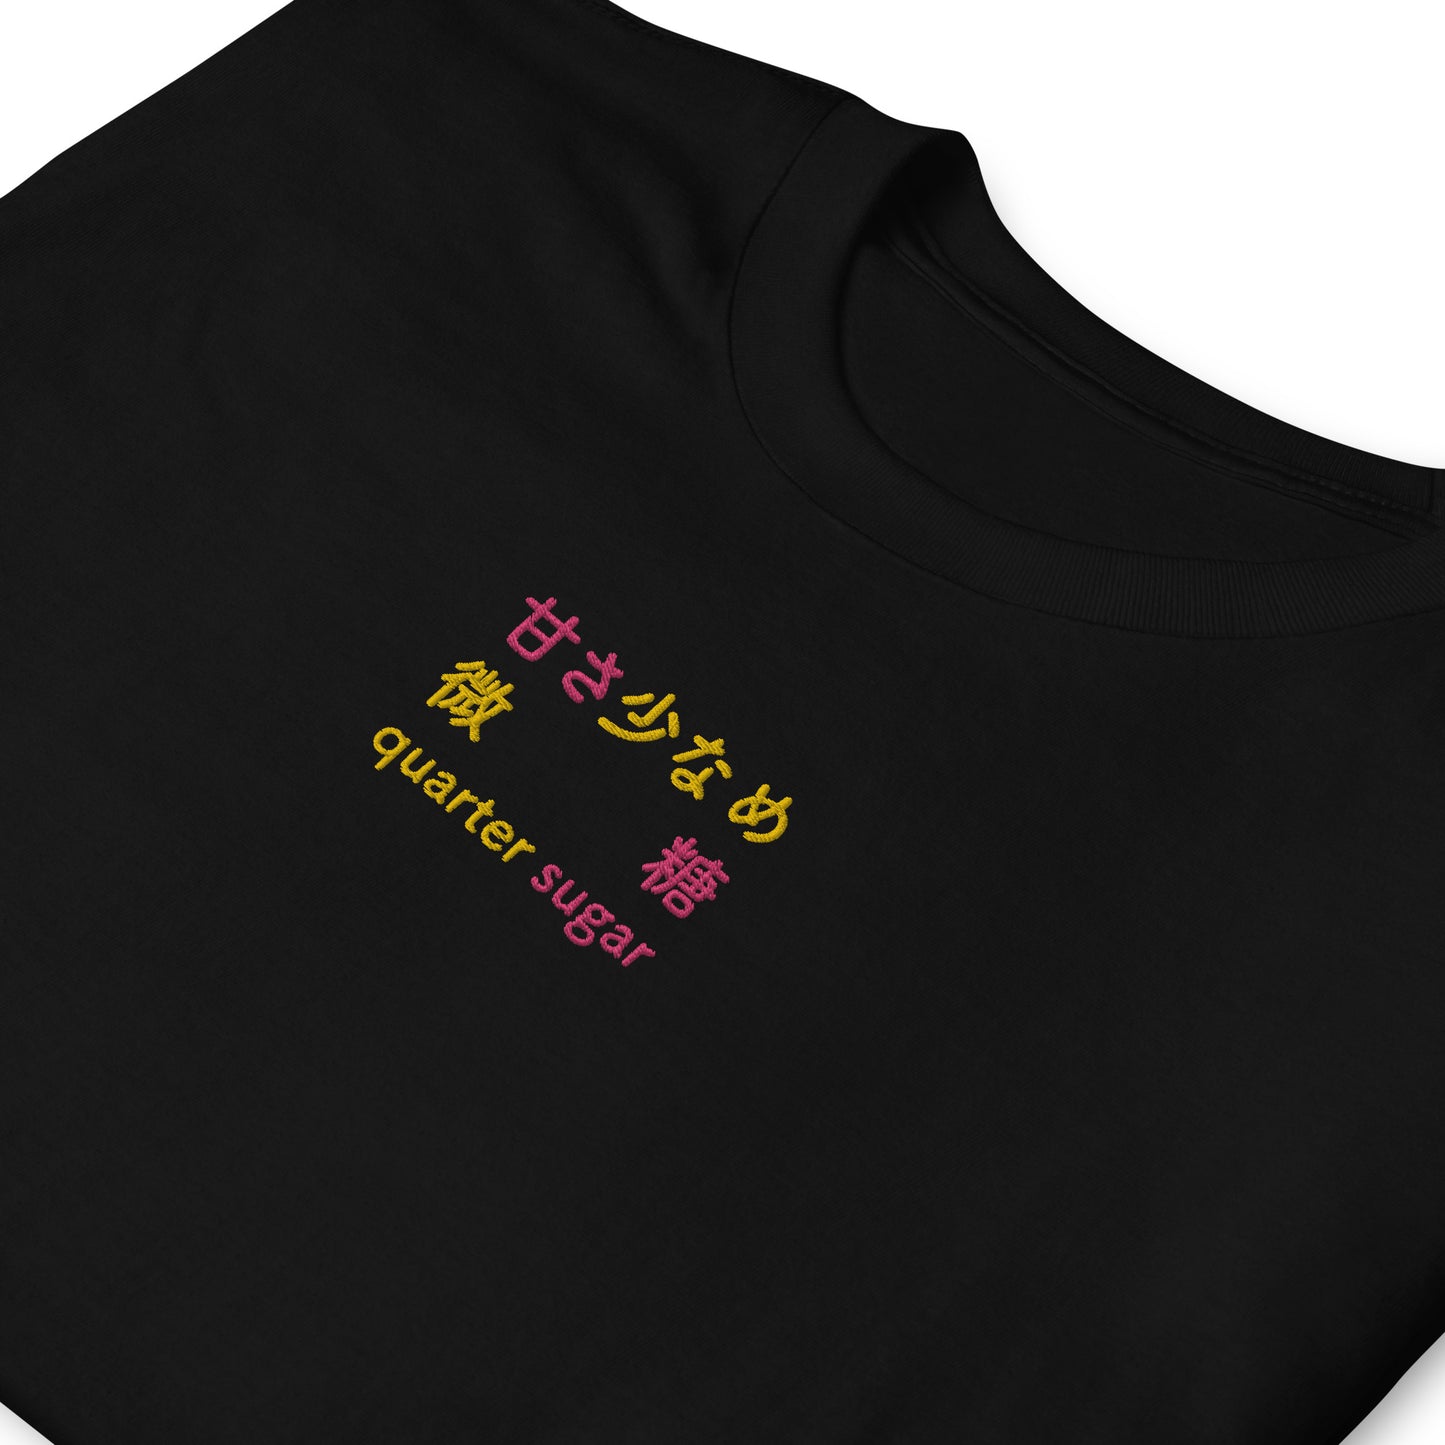 Black High Quality Tee - Front Design with an Yellow, Pink Embroidery "Quarter Sugar" in Japanese,Chinese and English